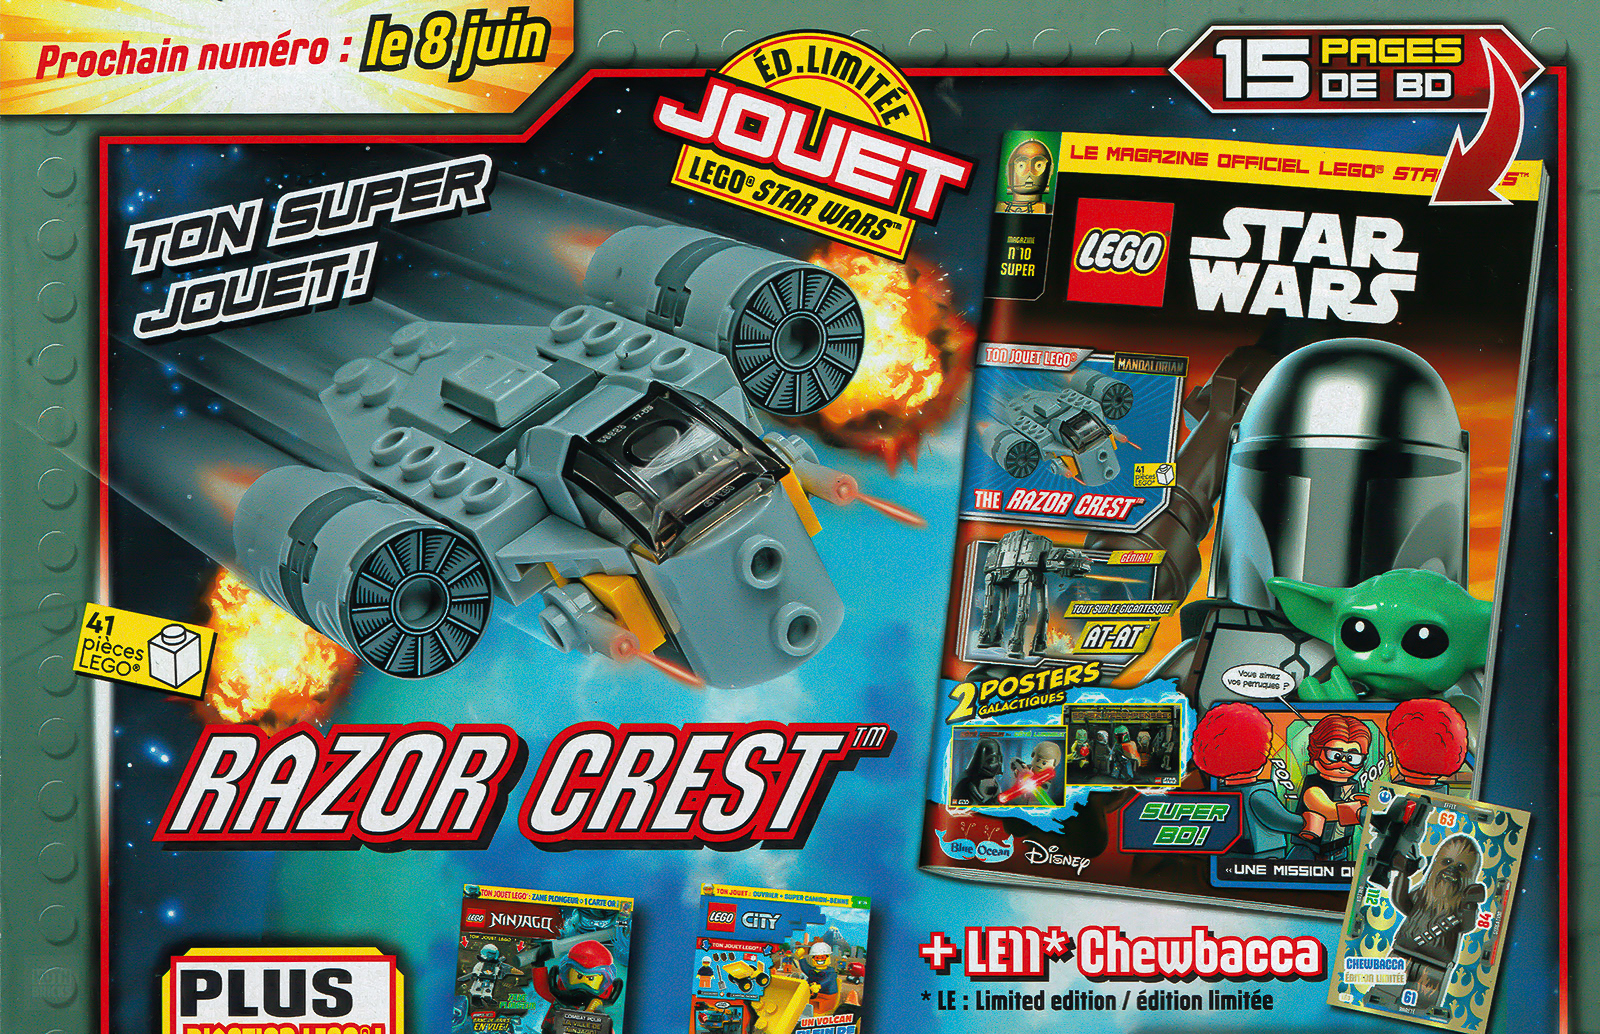 On newsstands: May 2022 issue of the Official LEGO Star Wars Magazine